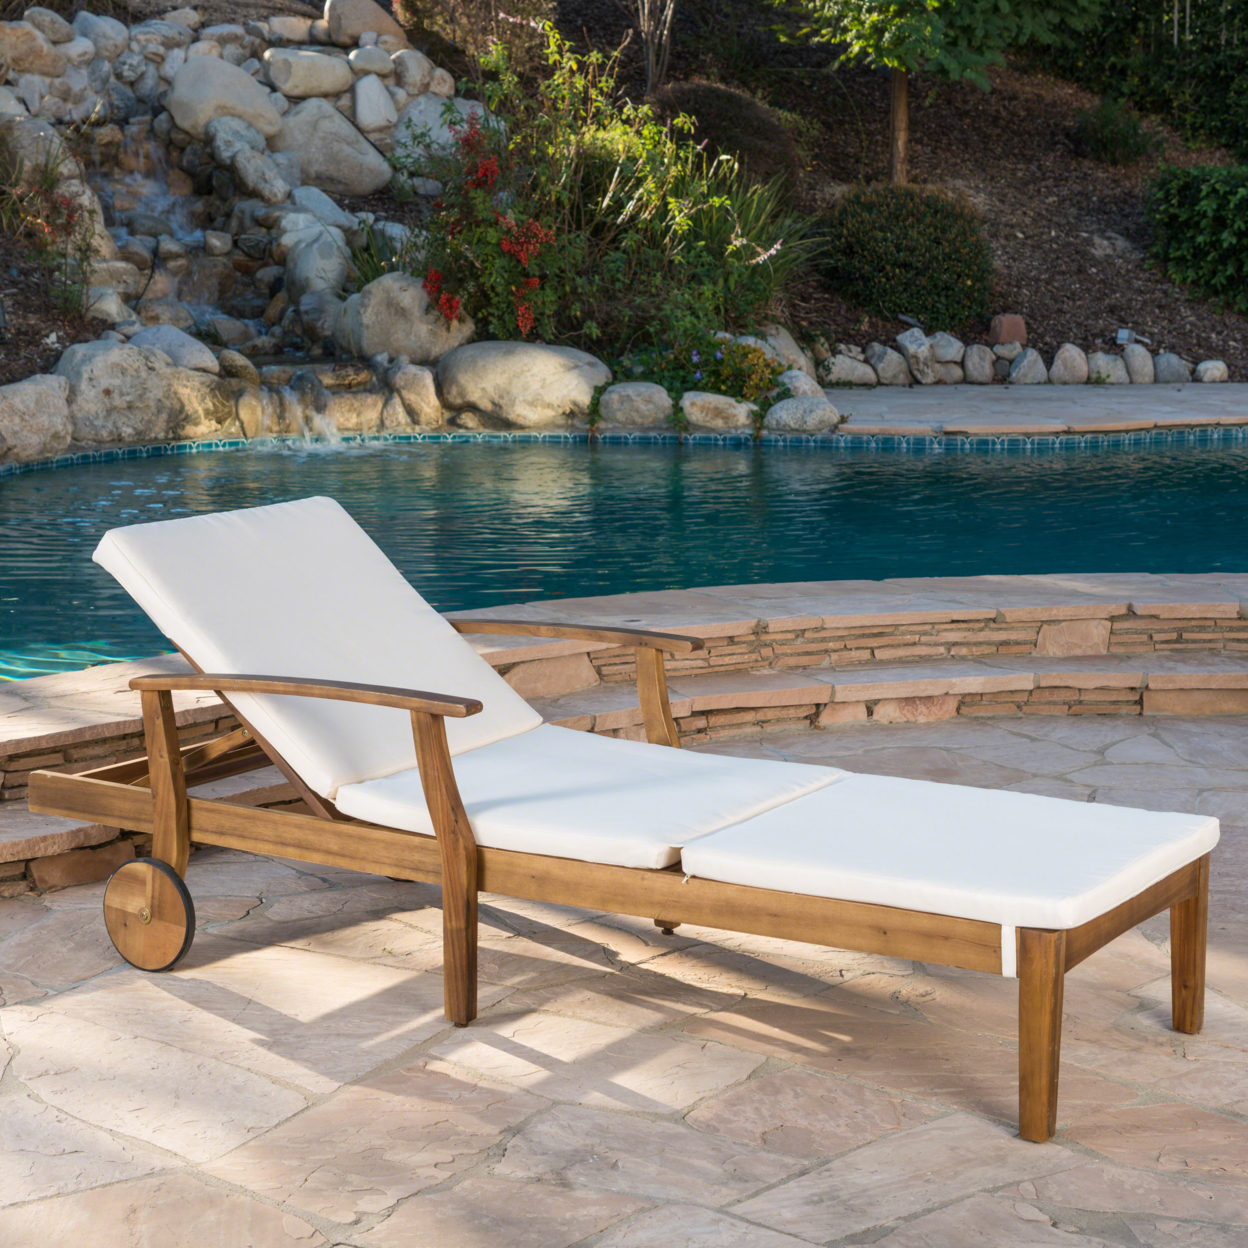 Daisy Outdoor Teak Finish Chaise Lounge With Water Resistant Cushion - Cream, Set Of 4